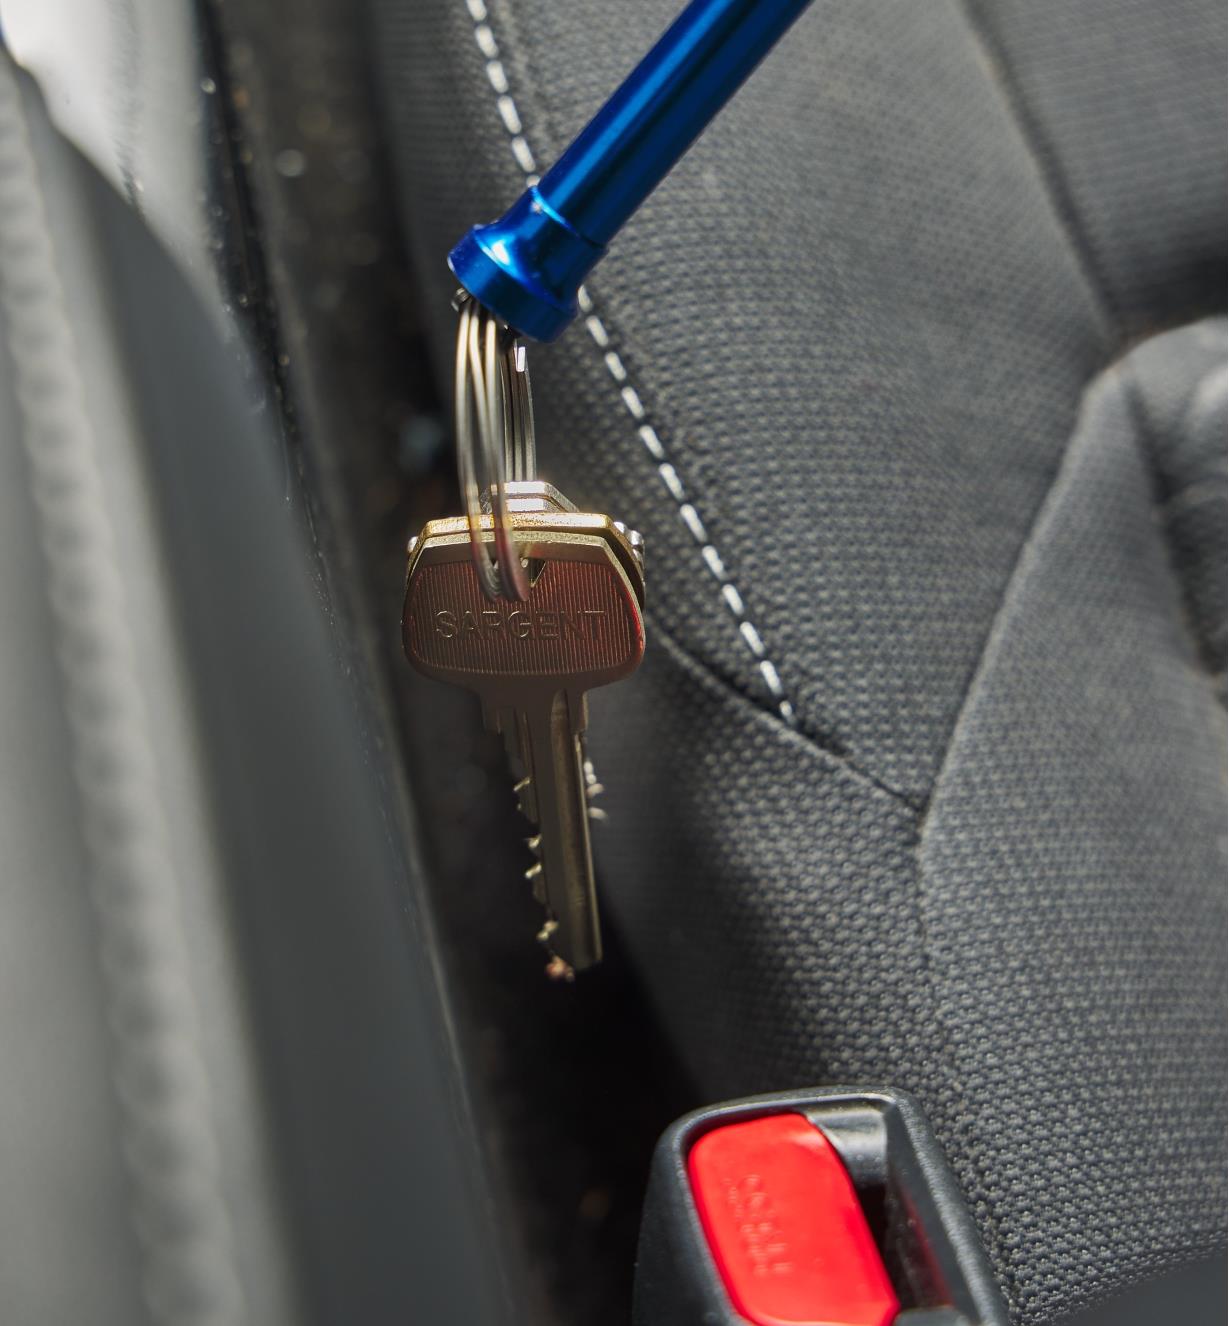 Using a magnetic grabber to retrieve keys from between car seats